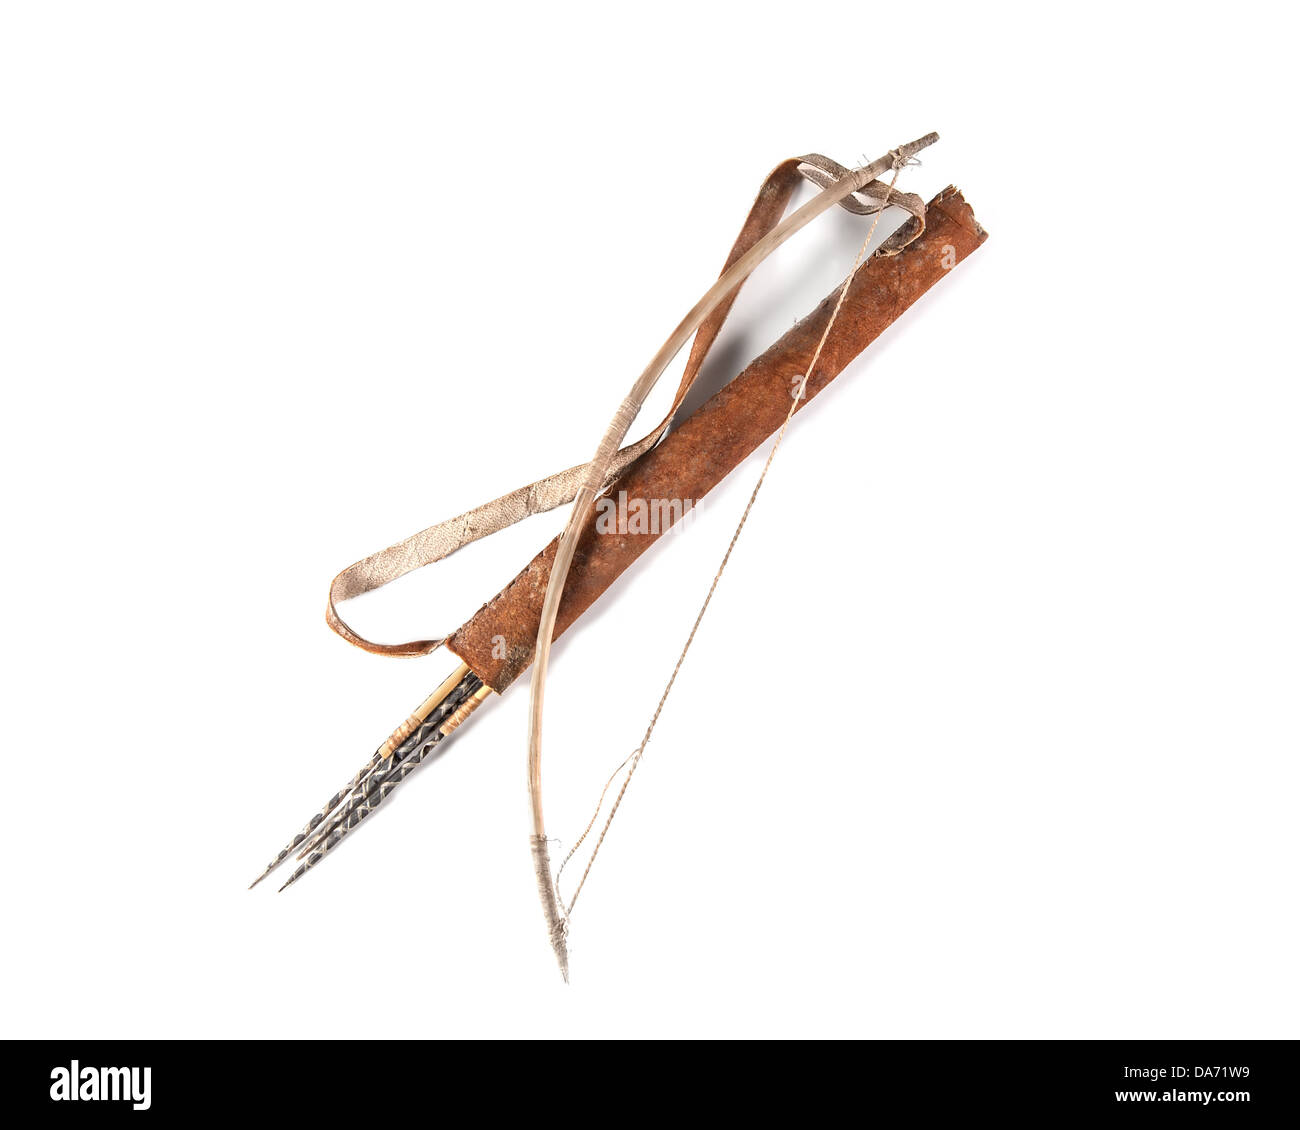 Old decorative bow, quiver and arrow on the white background Stock Photo